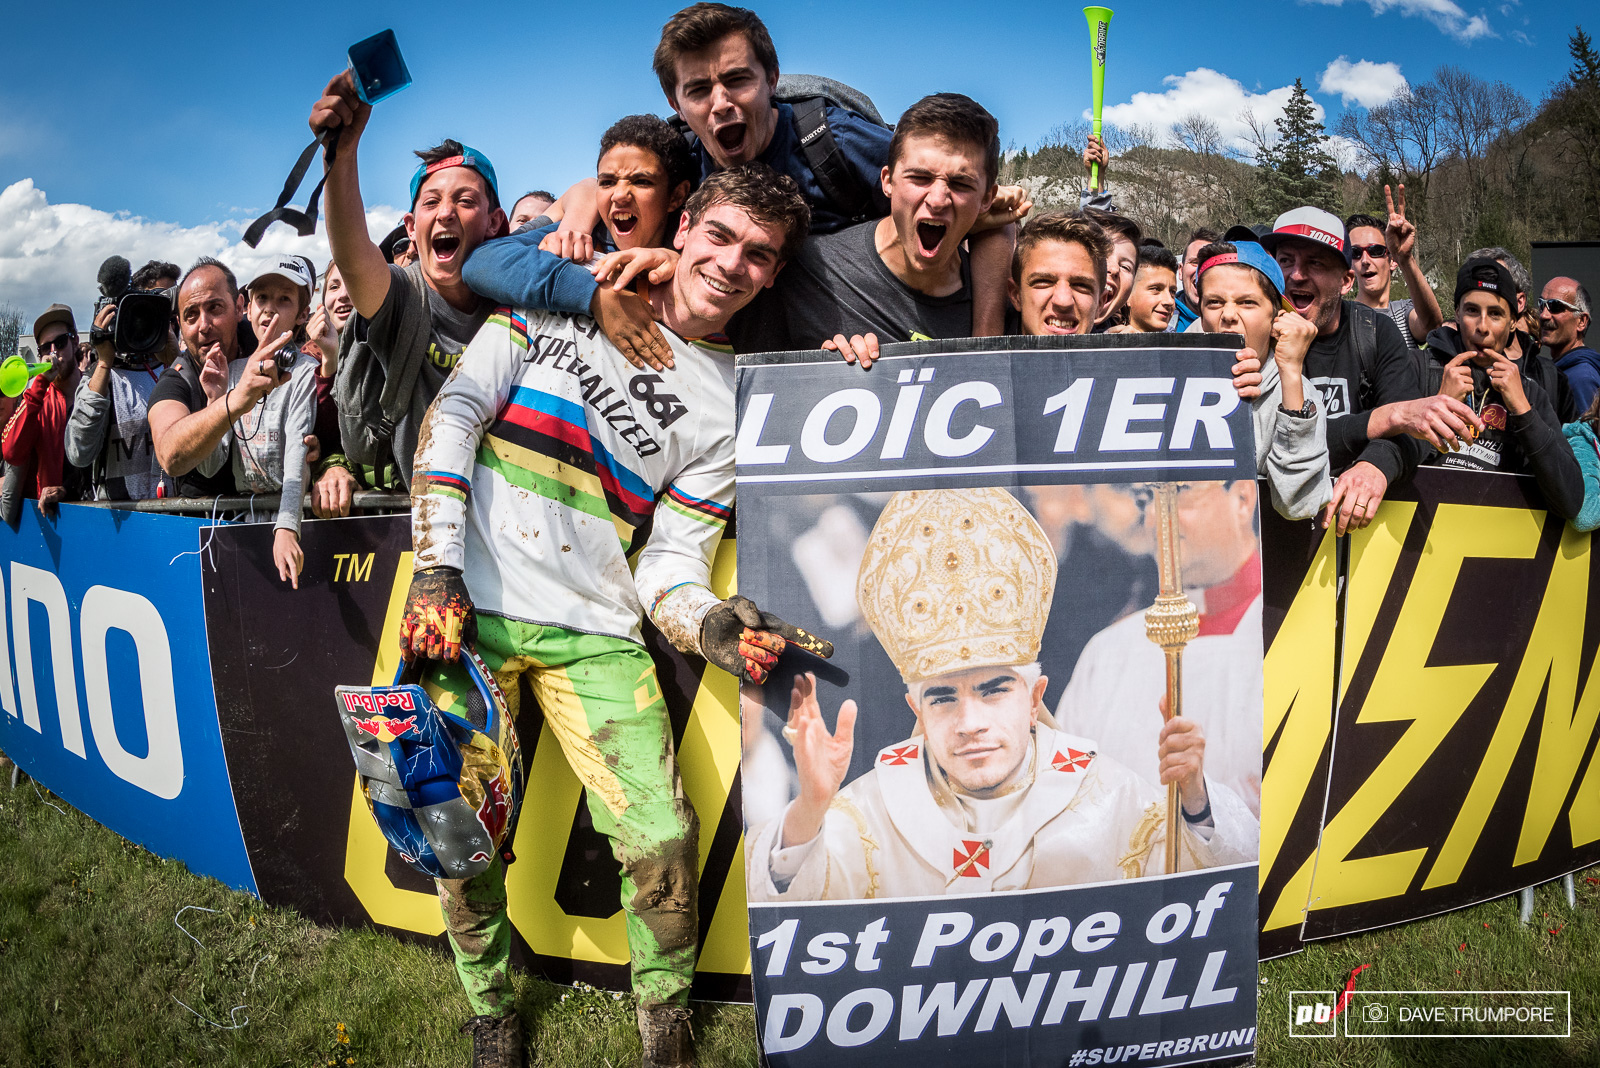 Logic's fans will stand by him no matter what, and he was greeted at the finish line by a hero's welcome.